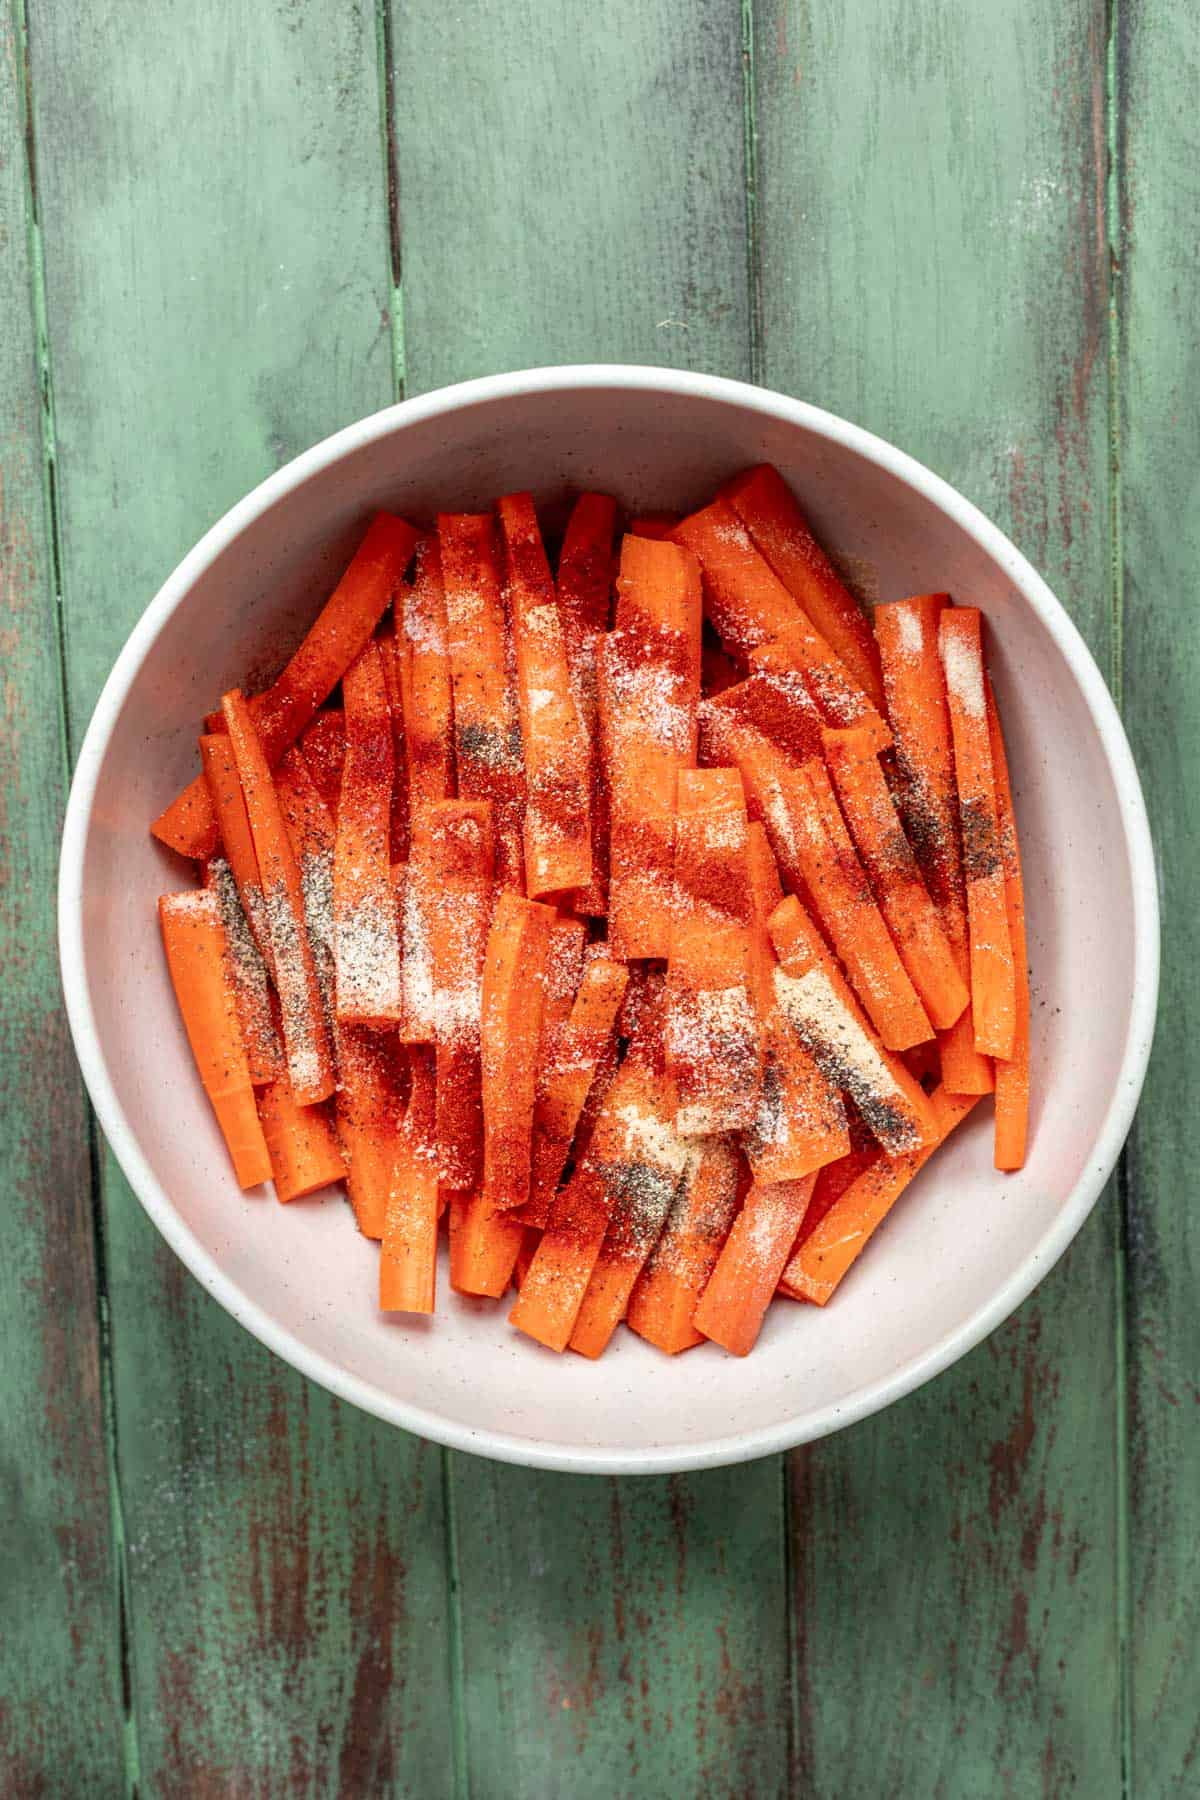 Carrots seasoned in a mixing bowl.